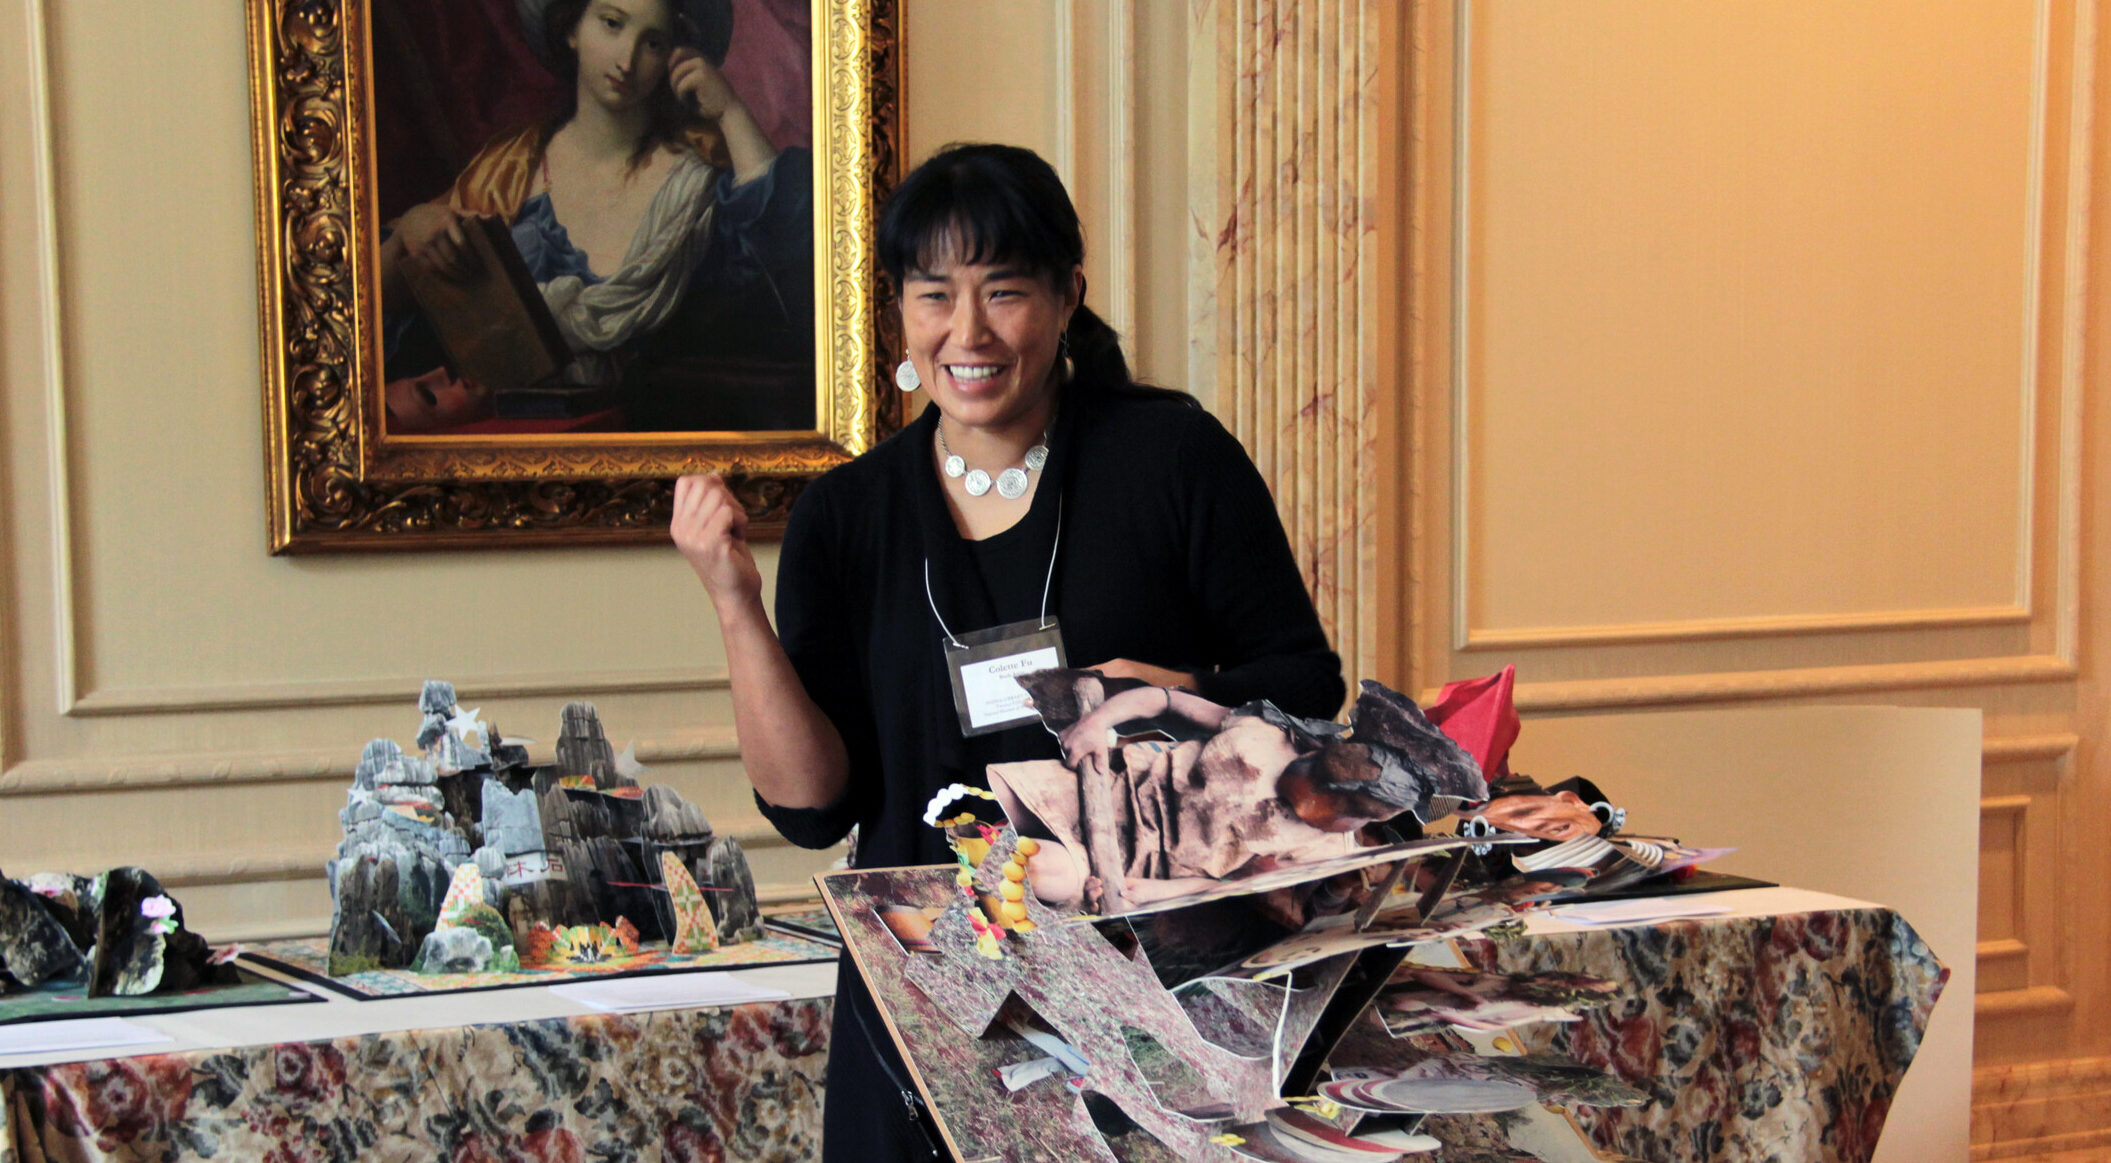 A woman with medium skin tone and dark hair wearing a black dress holds a large pop-up artist book, which unfolds in her hand and onto a table.